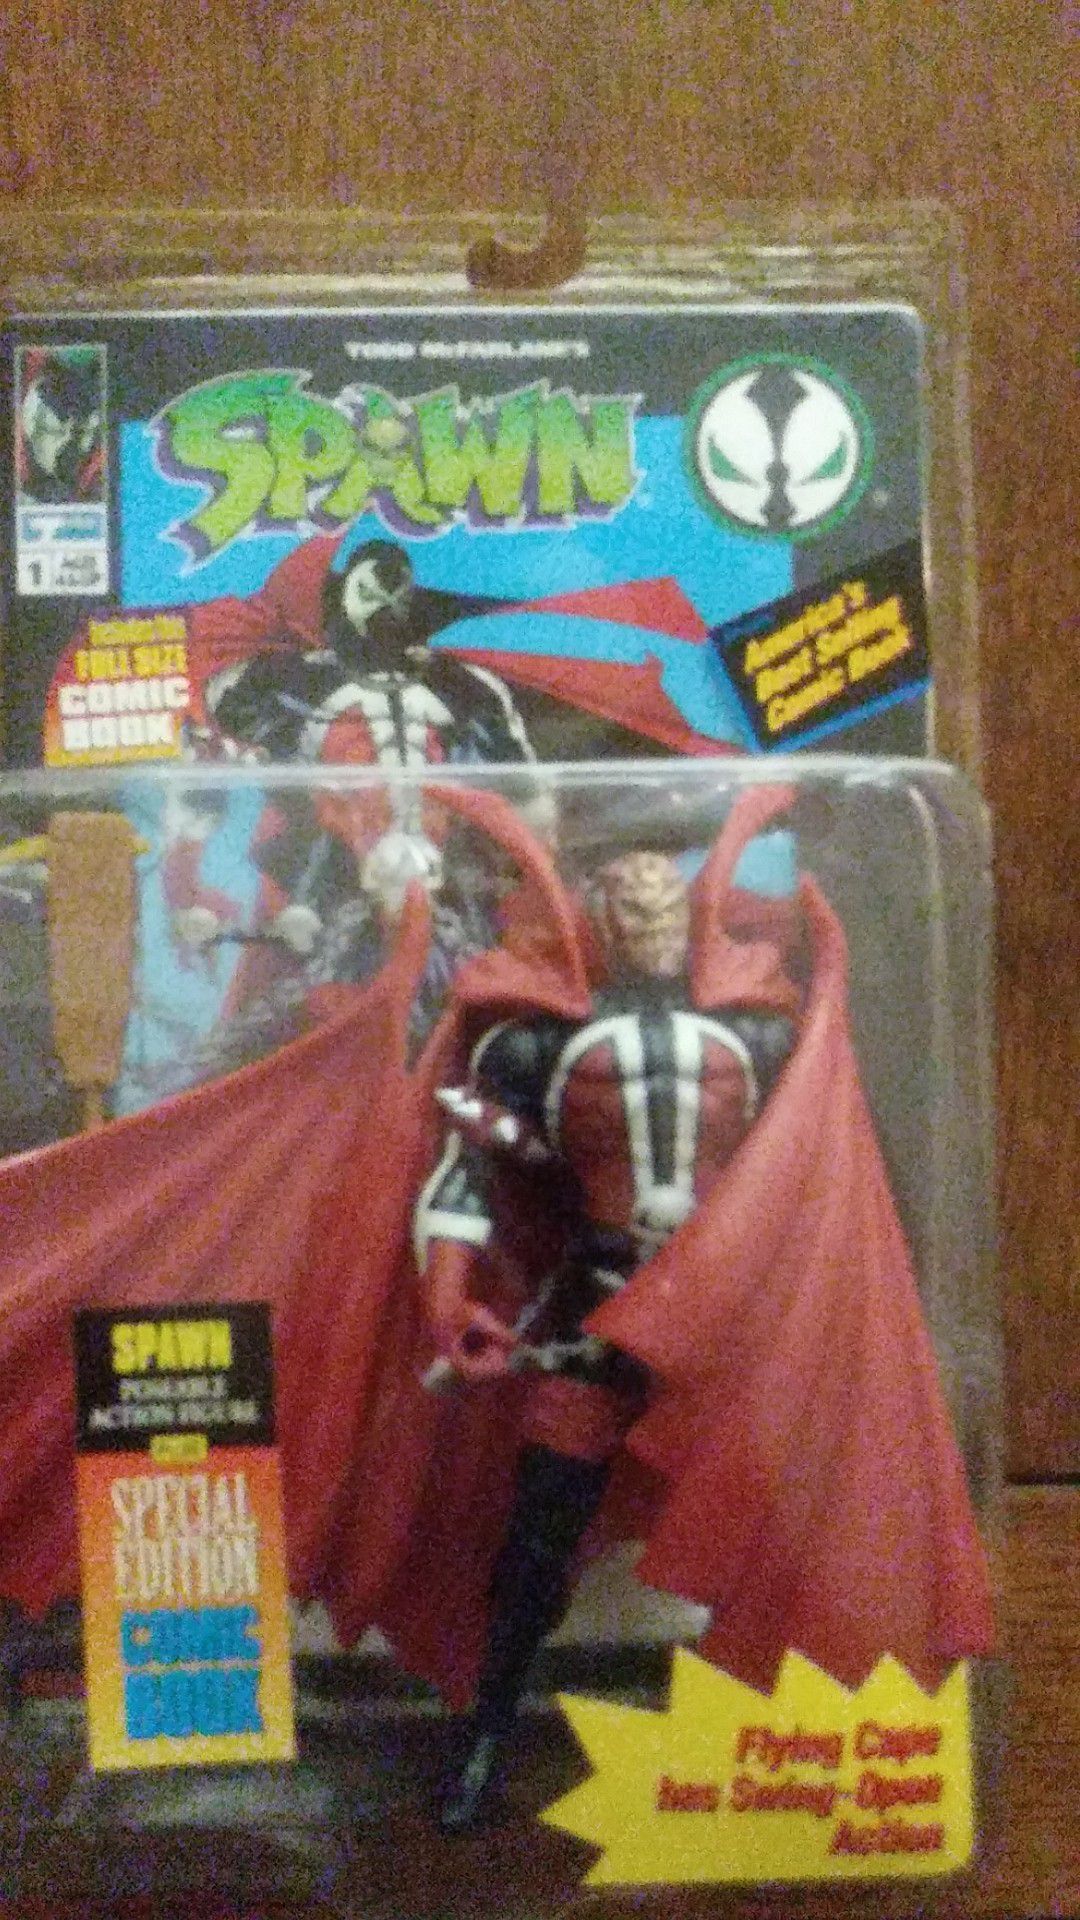 1994 Spawn Action Figure N Comic Book